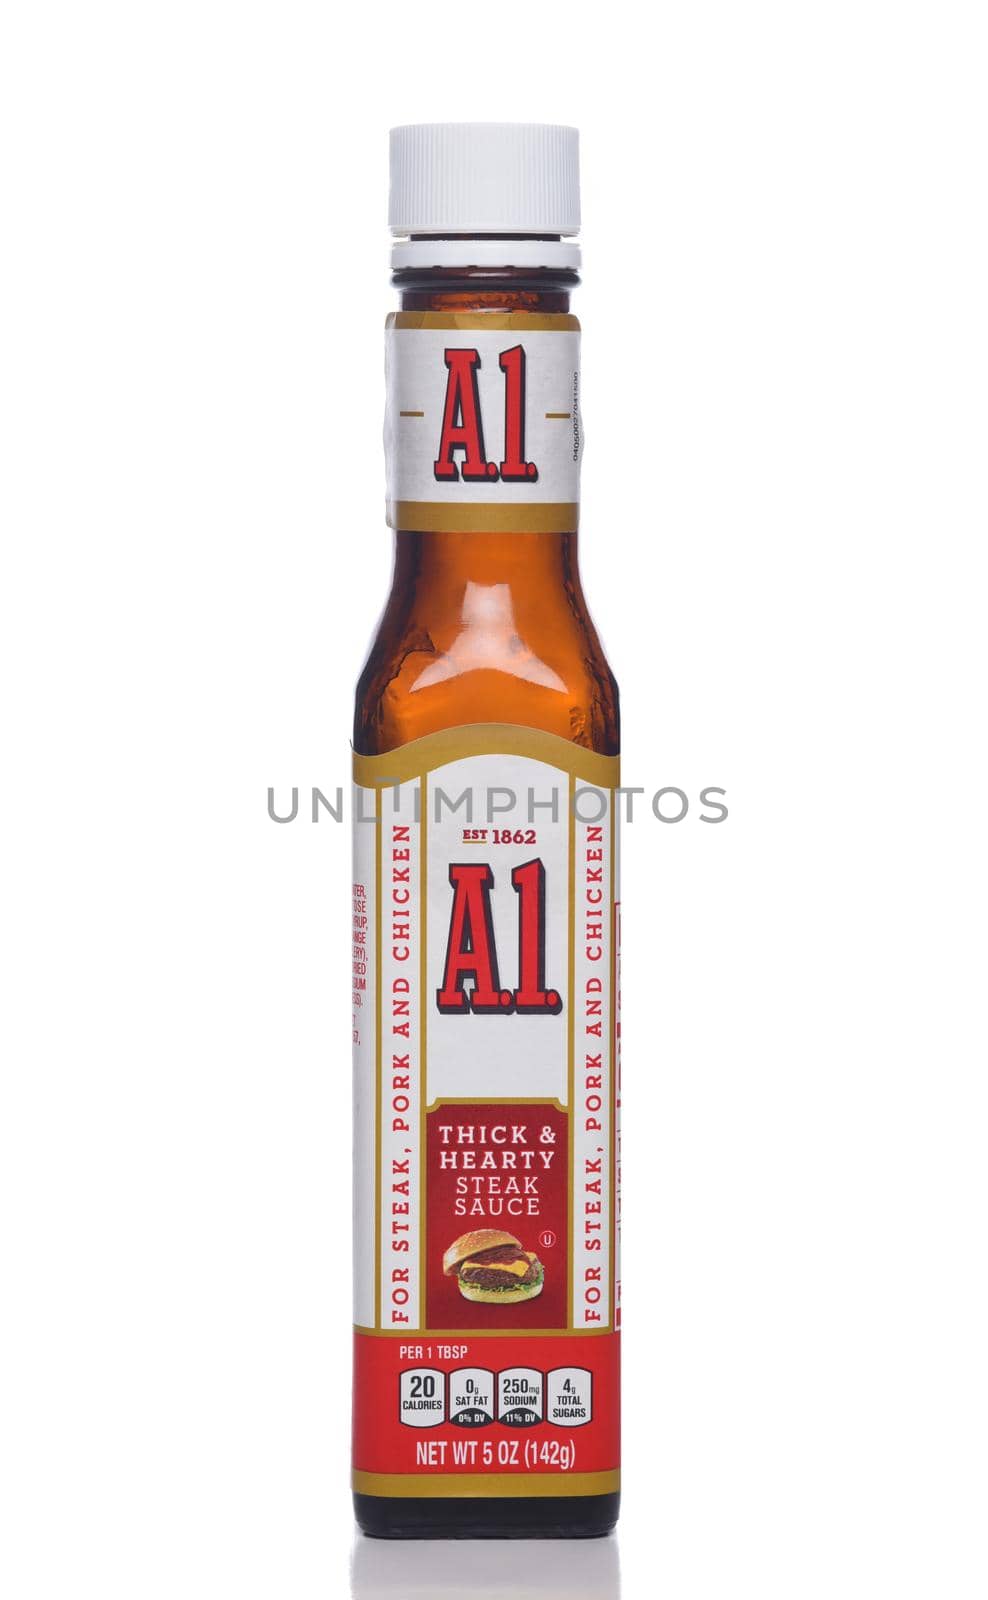 IRVINE, CALIFORNIA - 12 NOV 2020: A bottle of A1 Thick and Hearty Steak Sauce. 